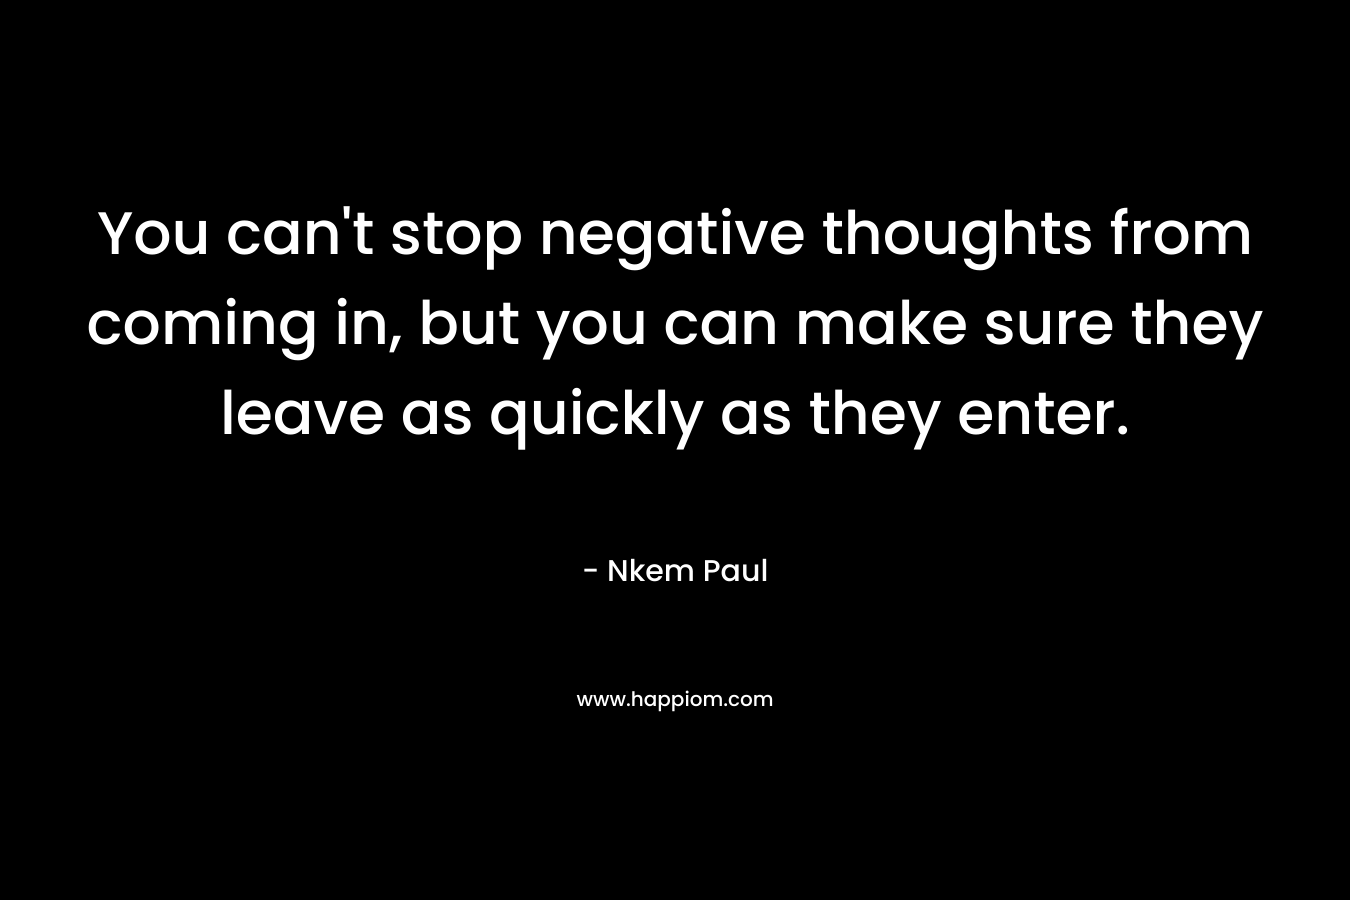 You can't stop negative thoughts from coming in, but you can make sure they leave as quickly as they enter.